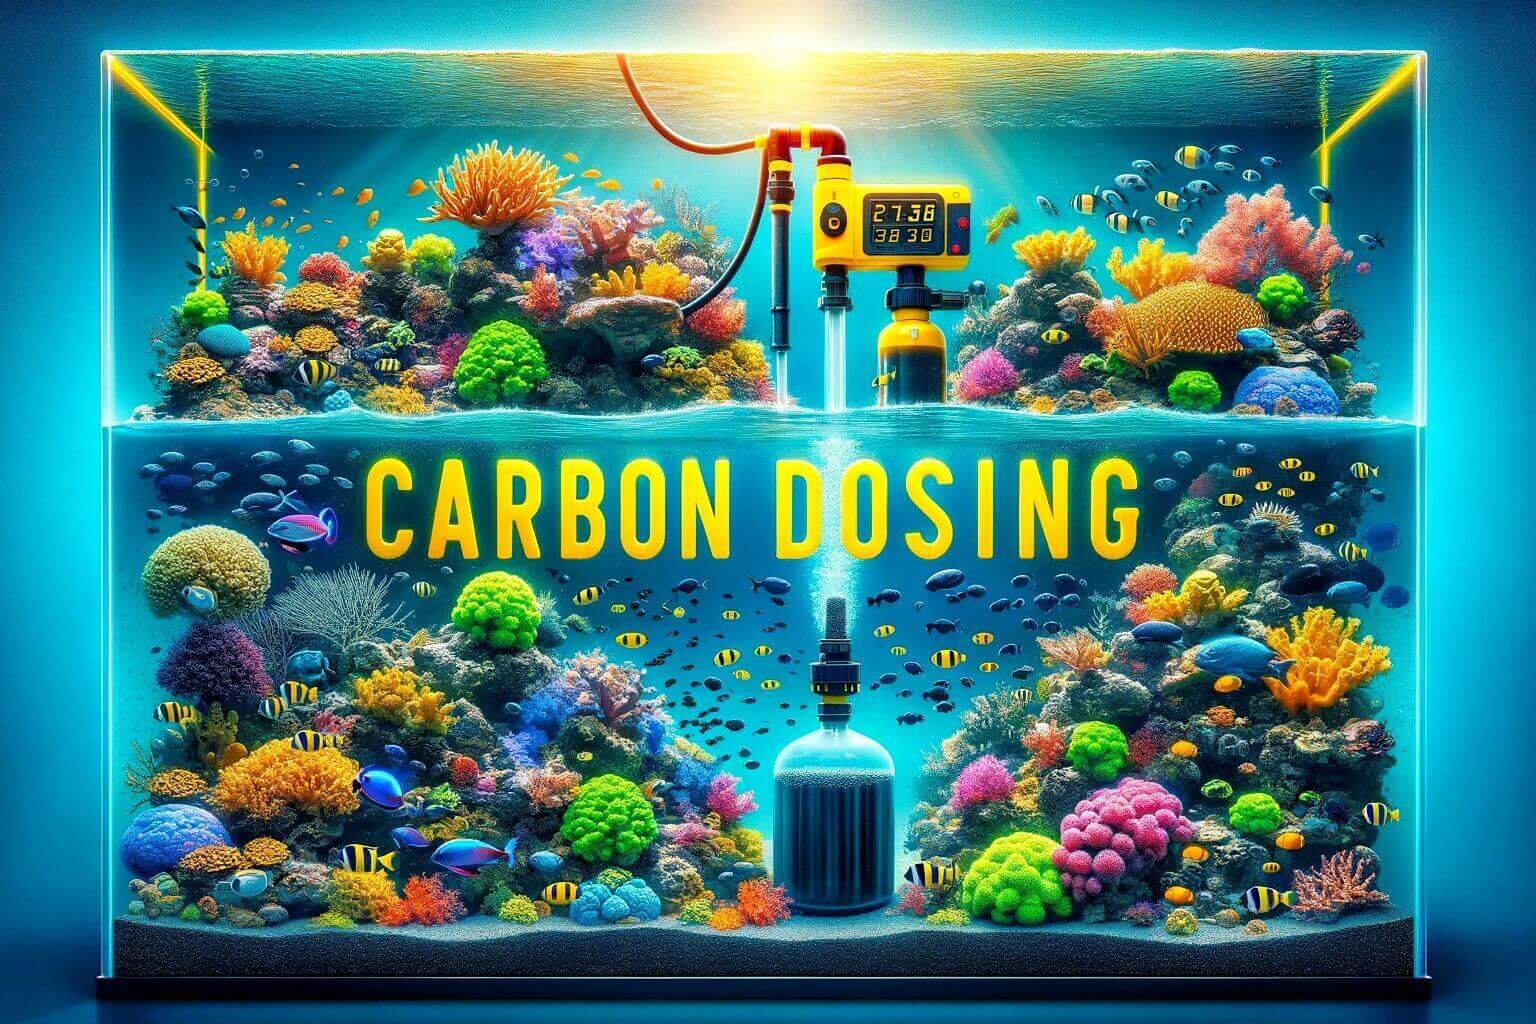 What is carbon dosing in reef tank